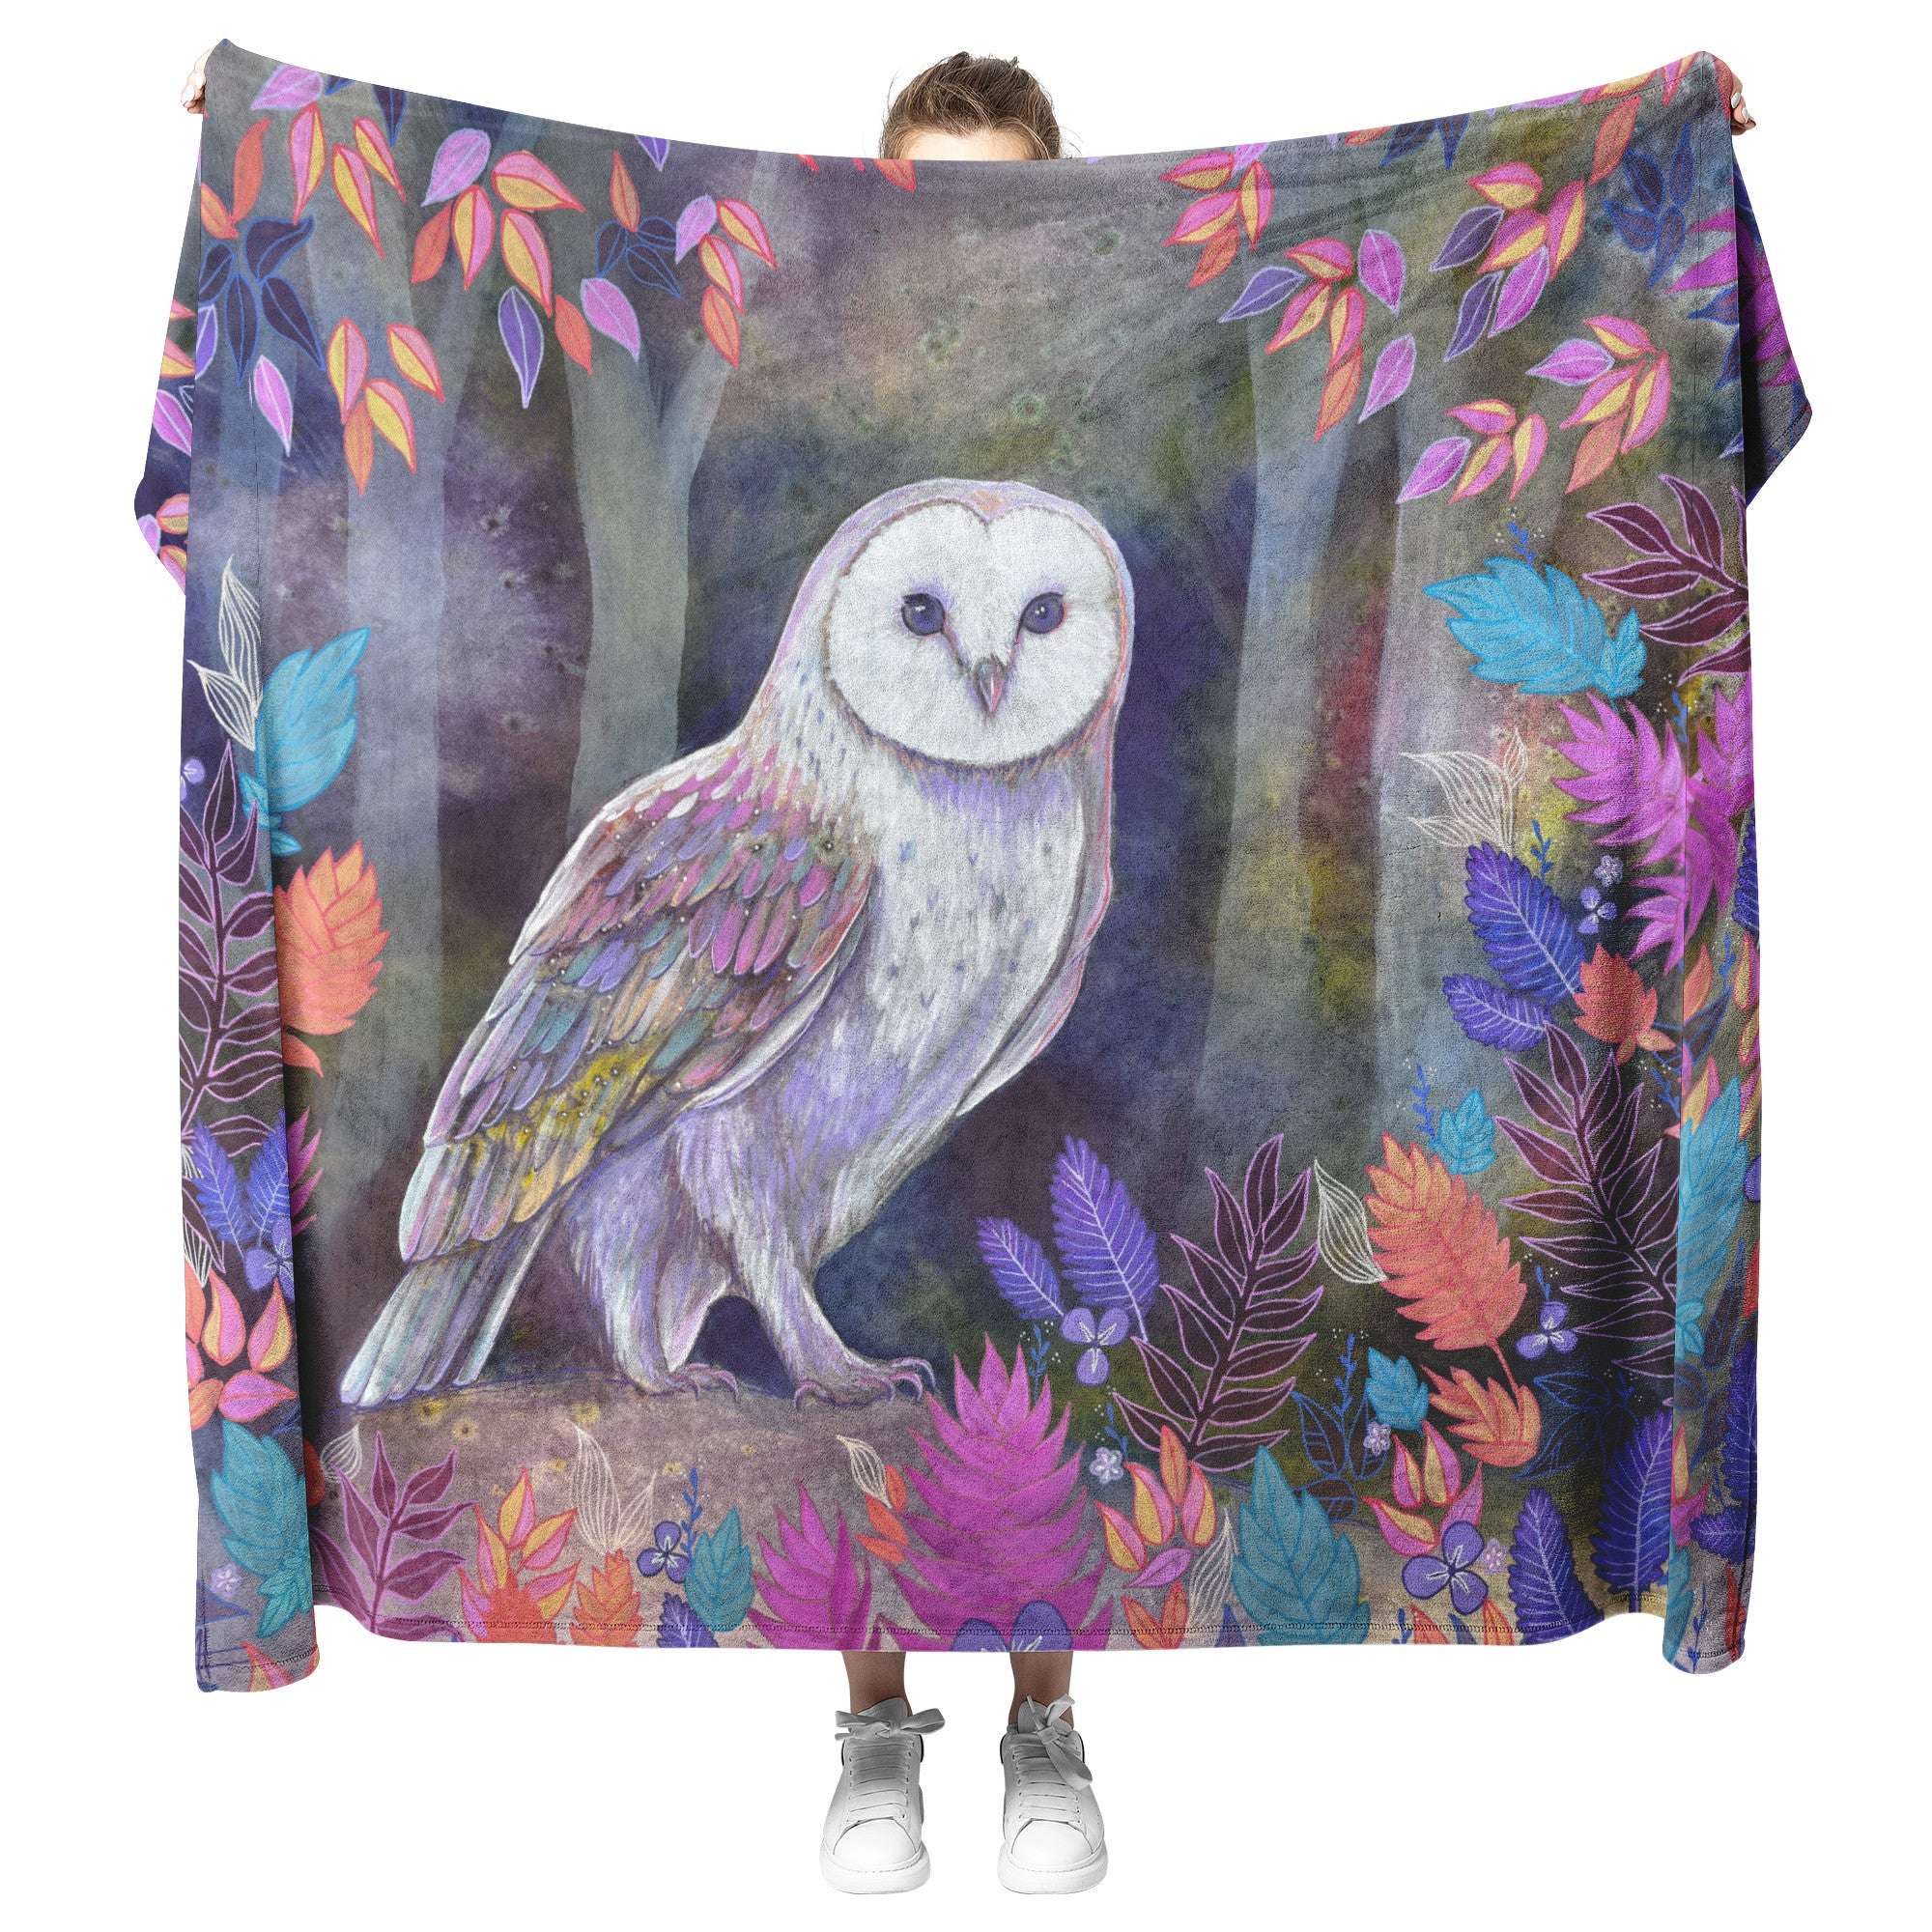 A person holding up an Owl Blanket, showcasing it's size and vibrant illustration.